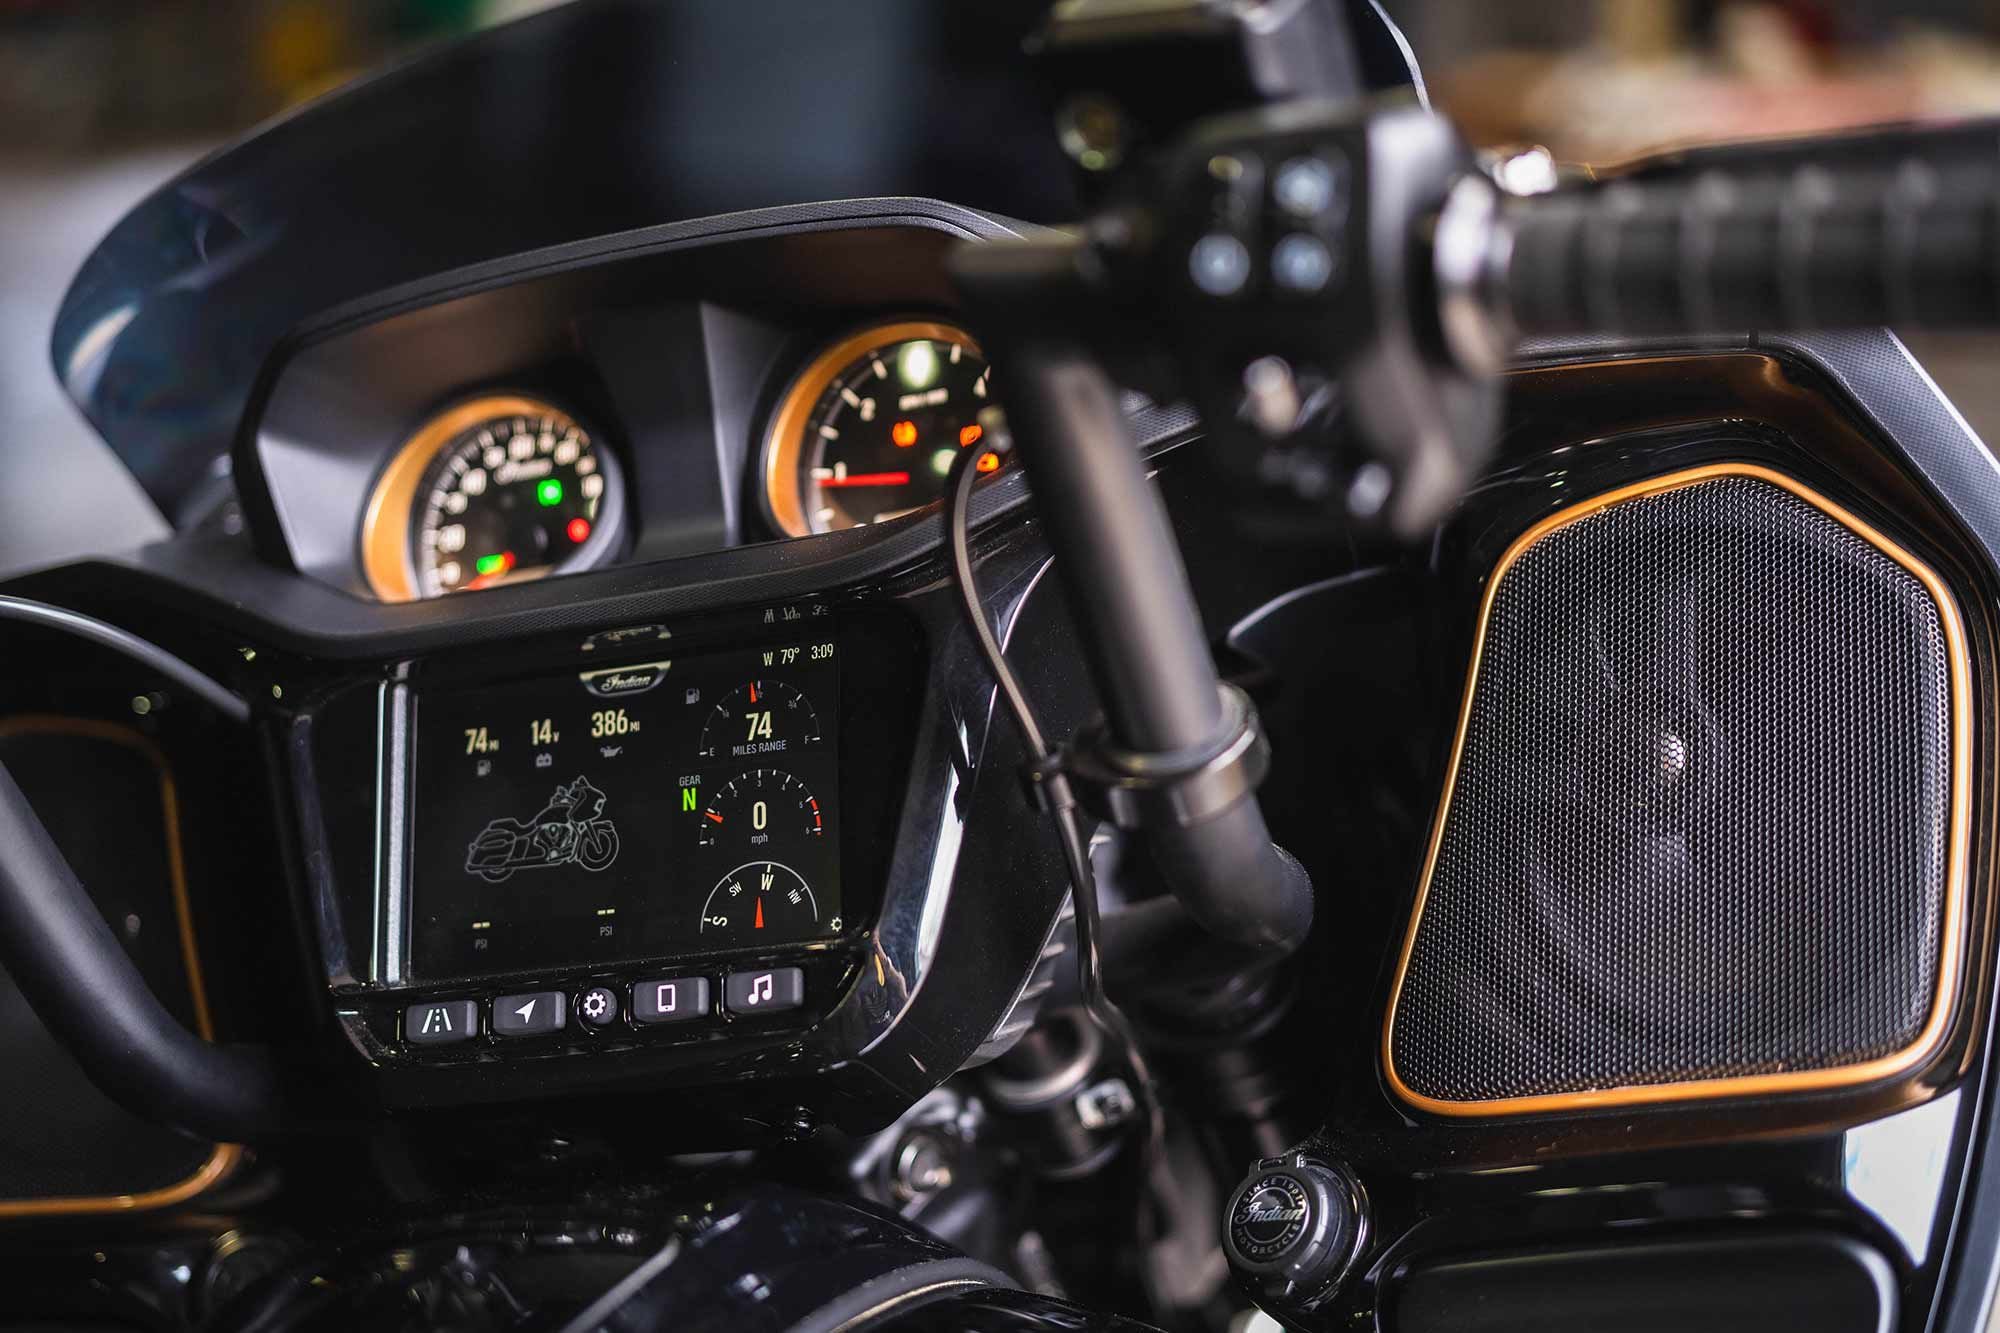 Bronze accents around the speakers and gauges add pops of color to keep things interesting.